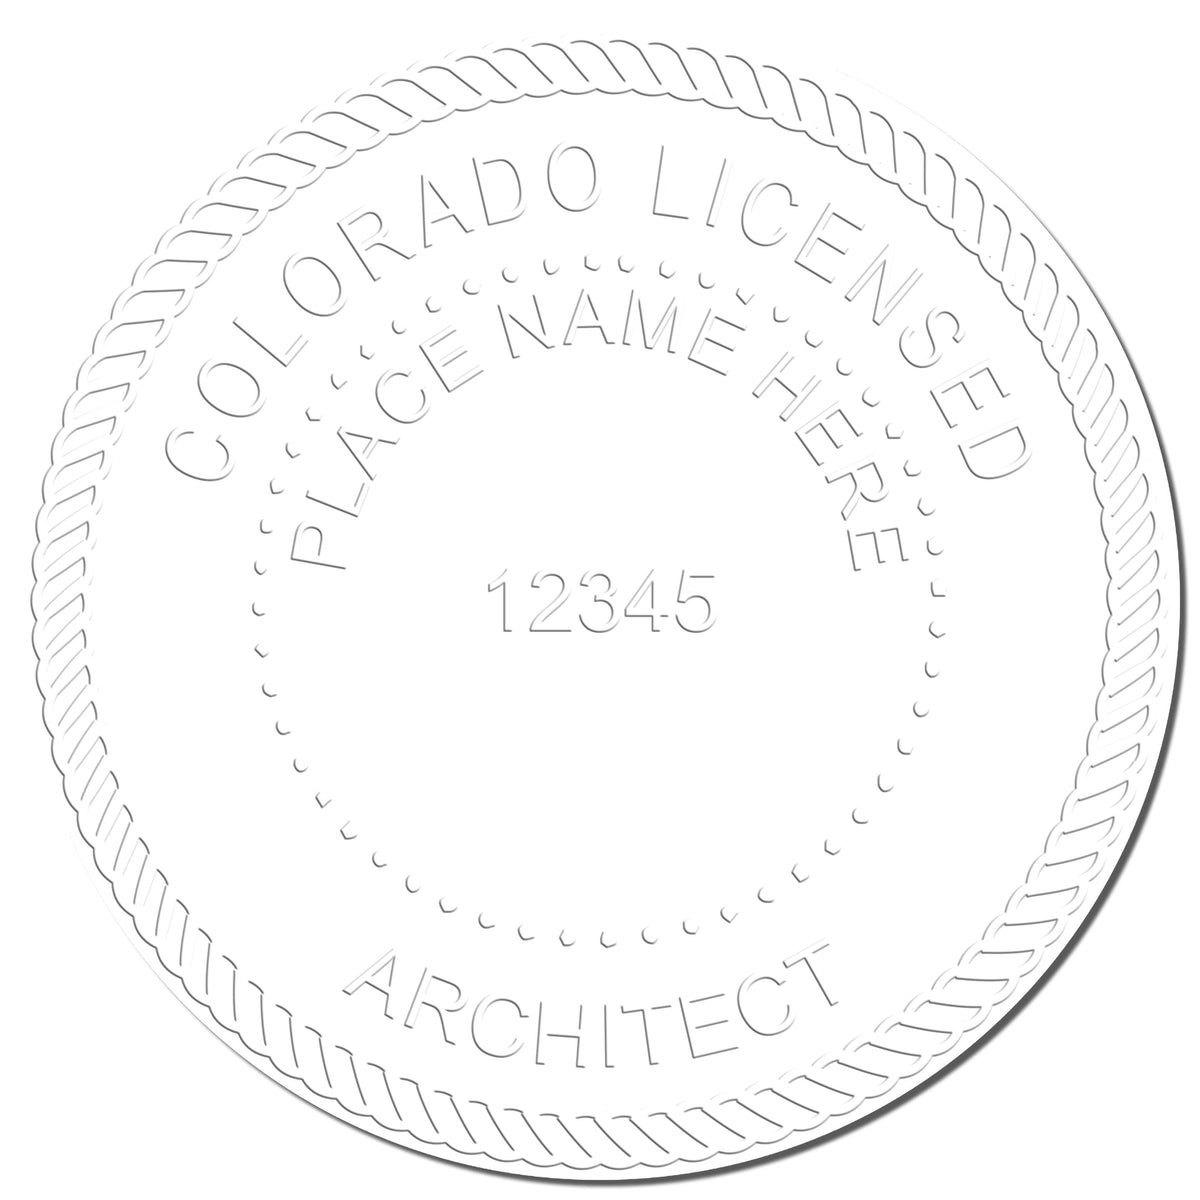 This paper is stamped with a sample imprint of the Hybrid Colorado Architect Seal, signifying its quality and reliability.